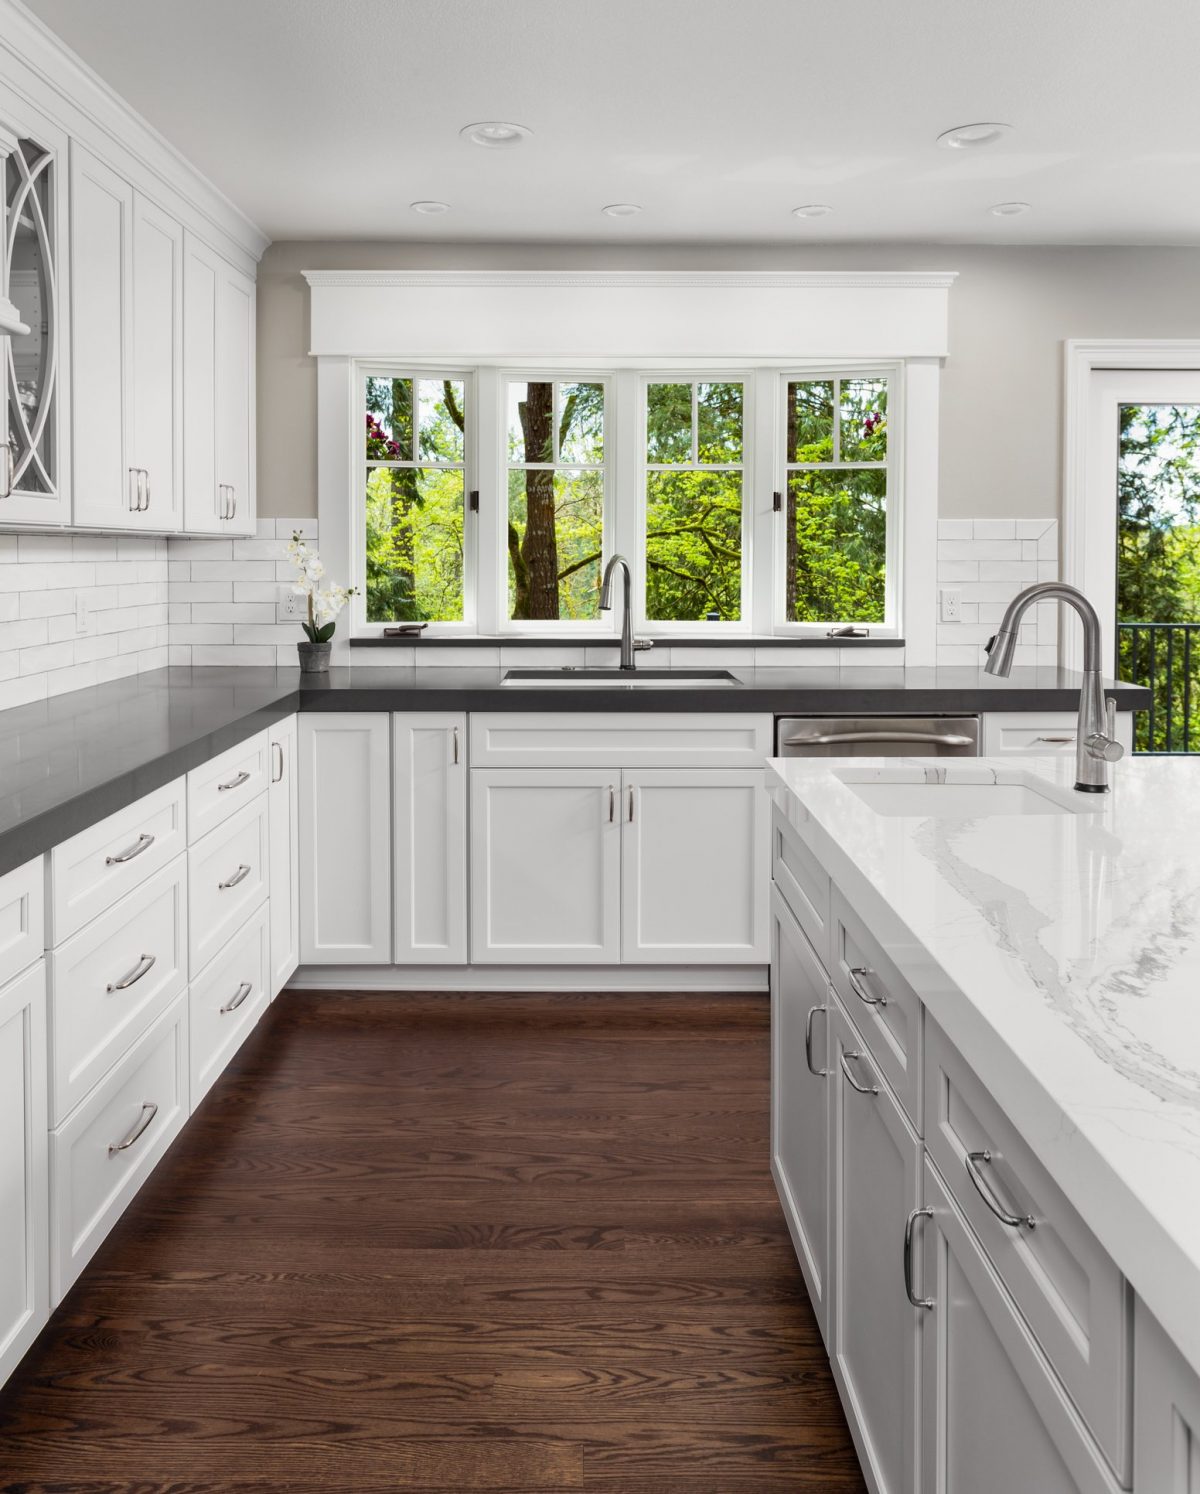 Refacing or Replacing Kitchen Cabinets